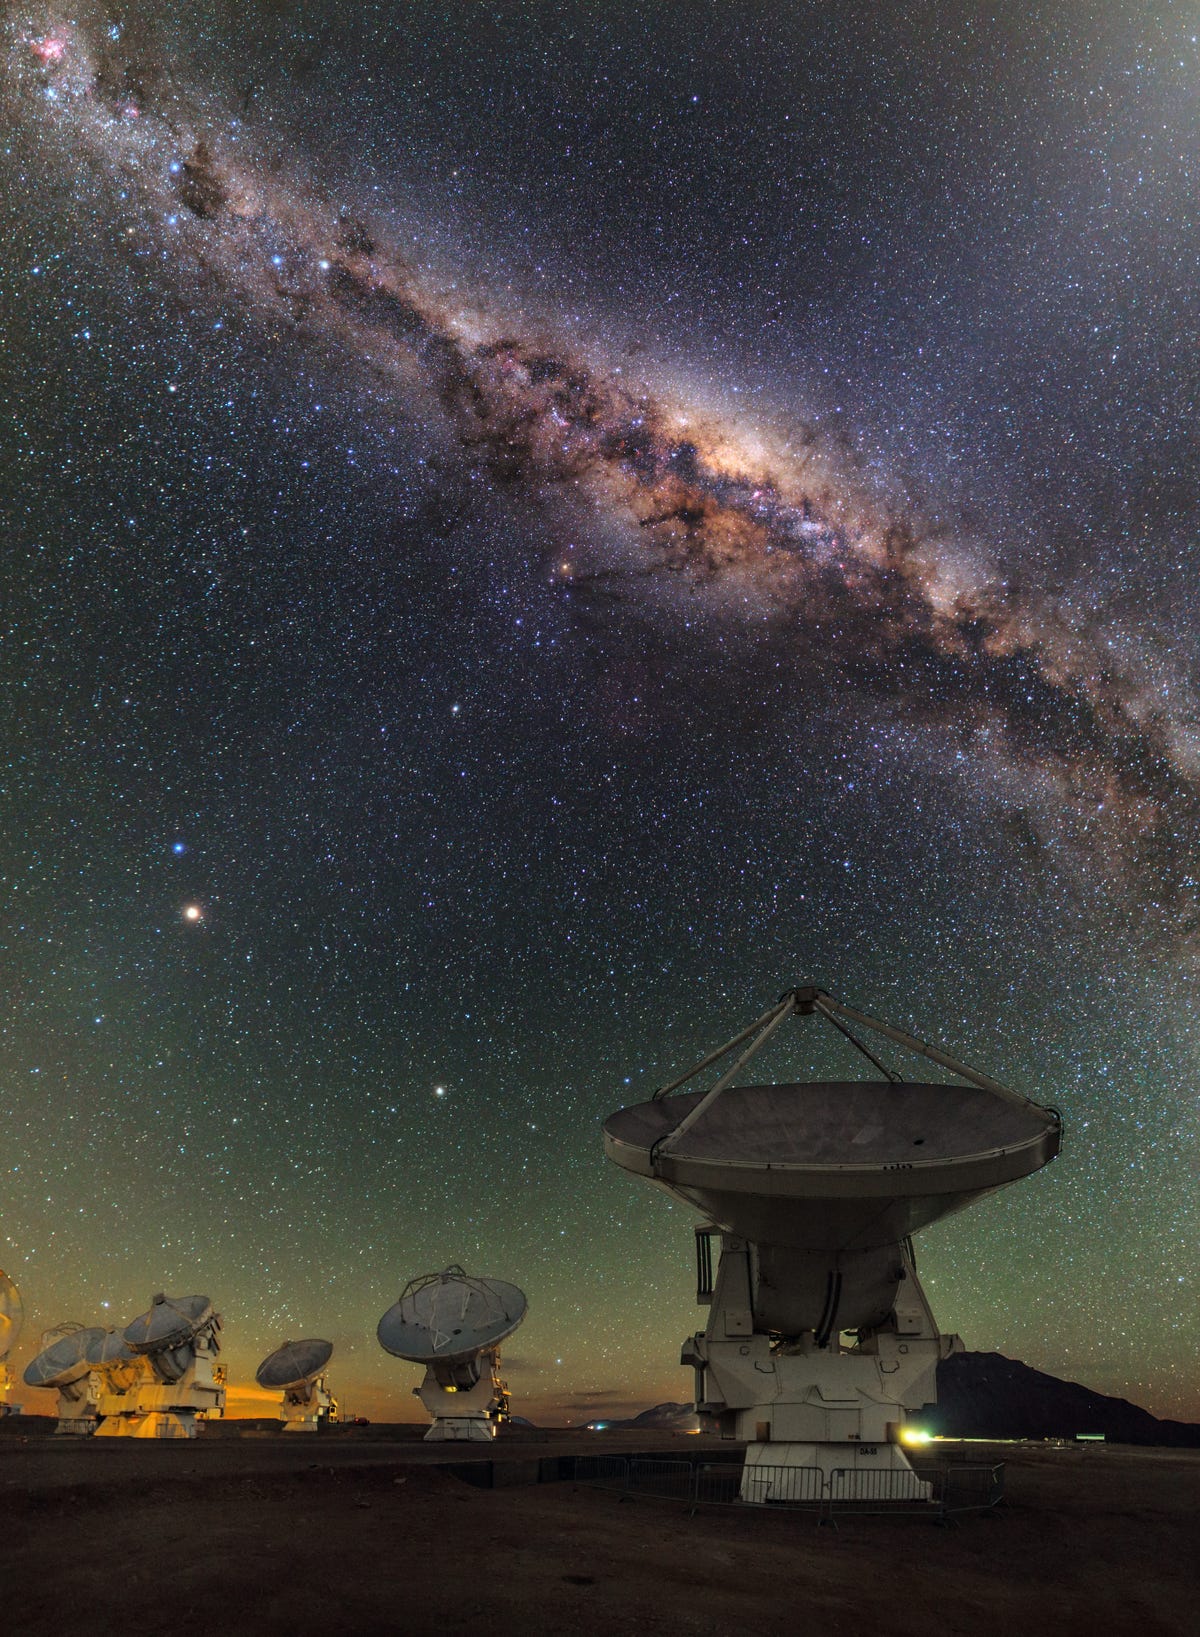 World’s largest radio telescope captures aftermath of star collisions